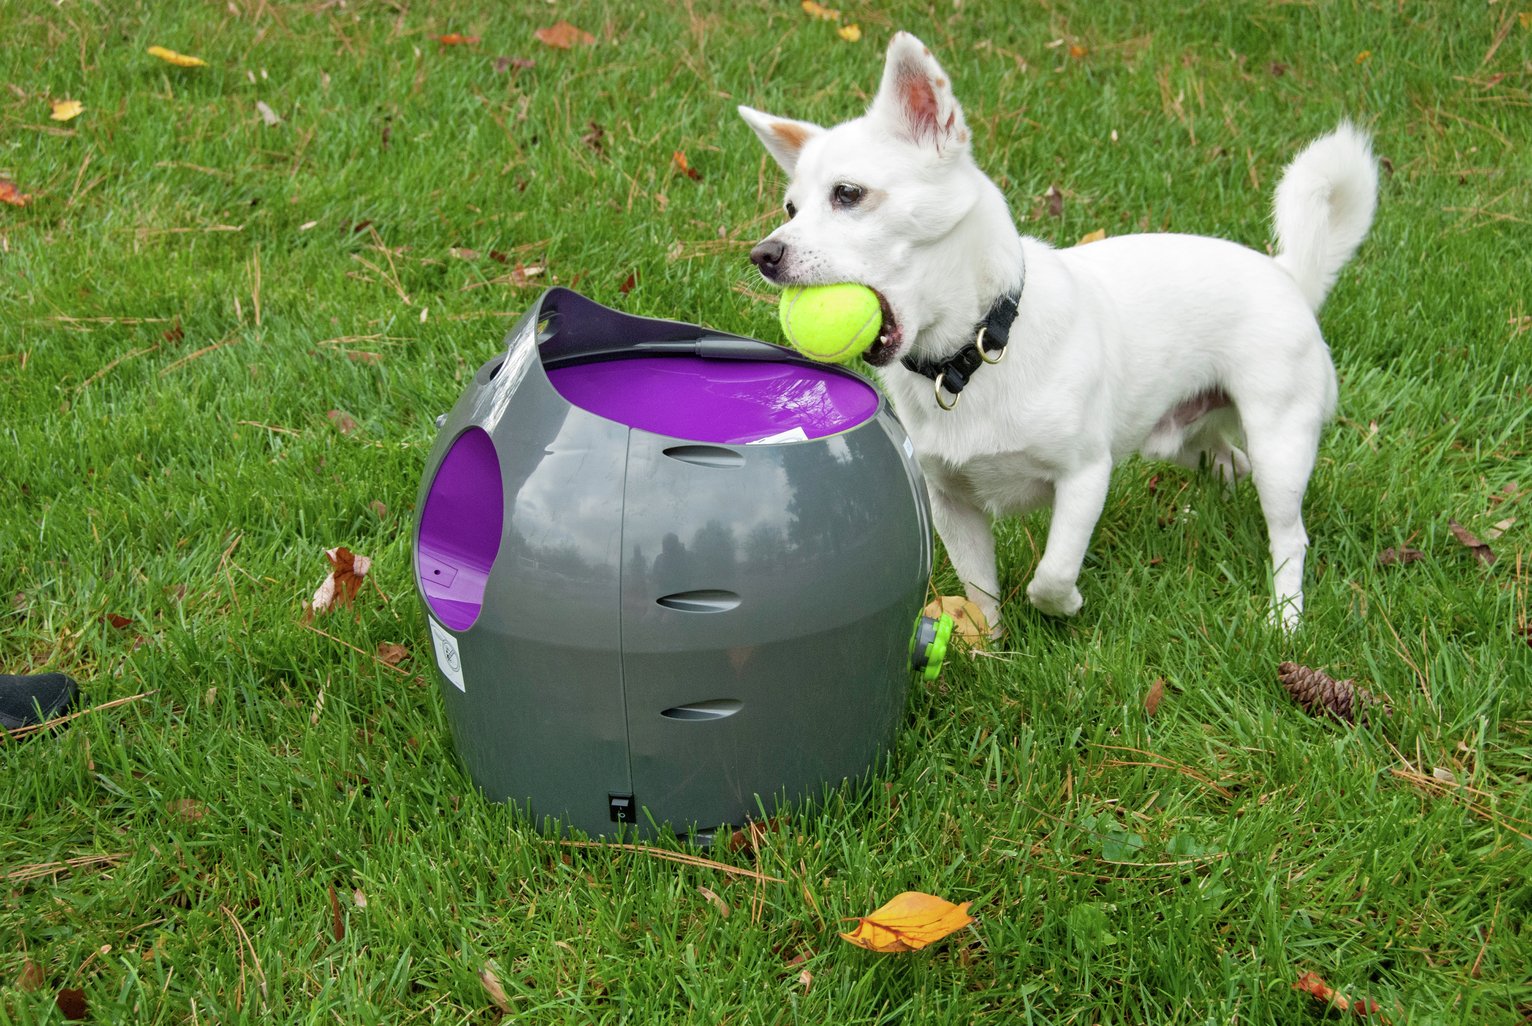 auto ball thrower for dogs